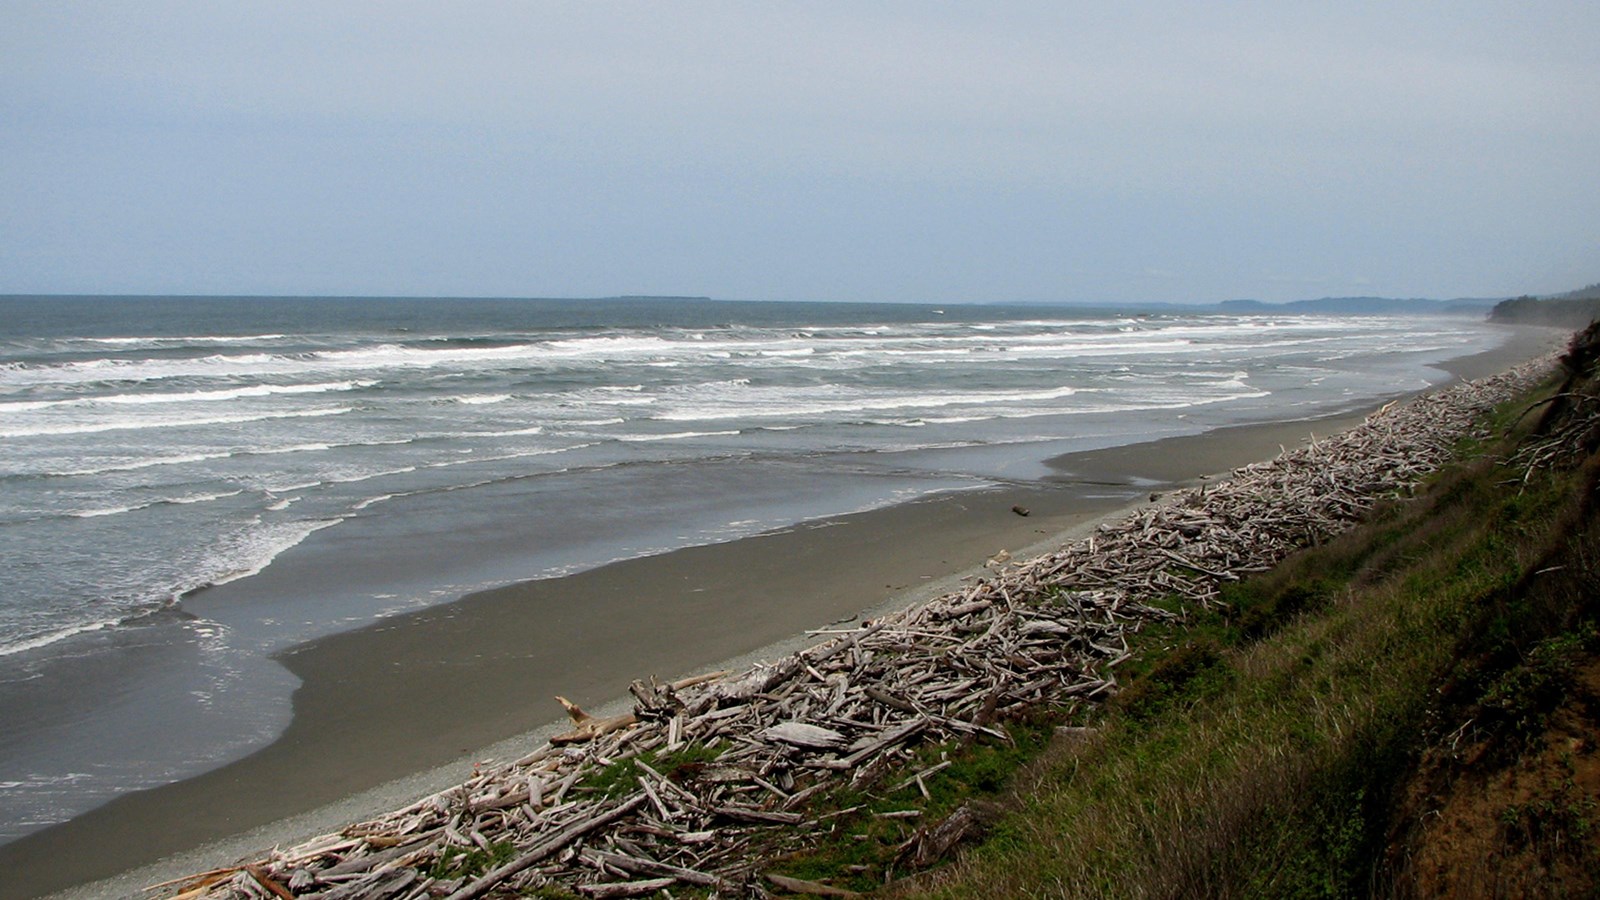 A beach stretches into the distance, white surf gently lapping at its sands and driftwood.